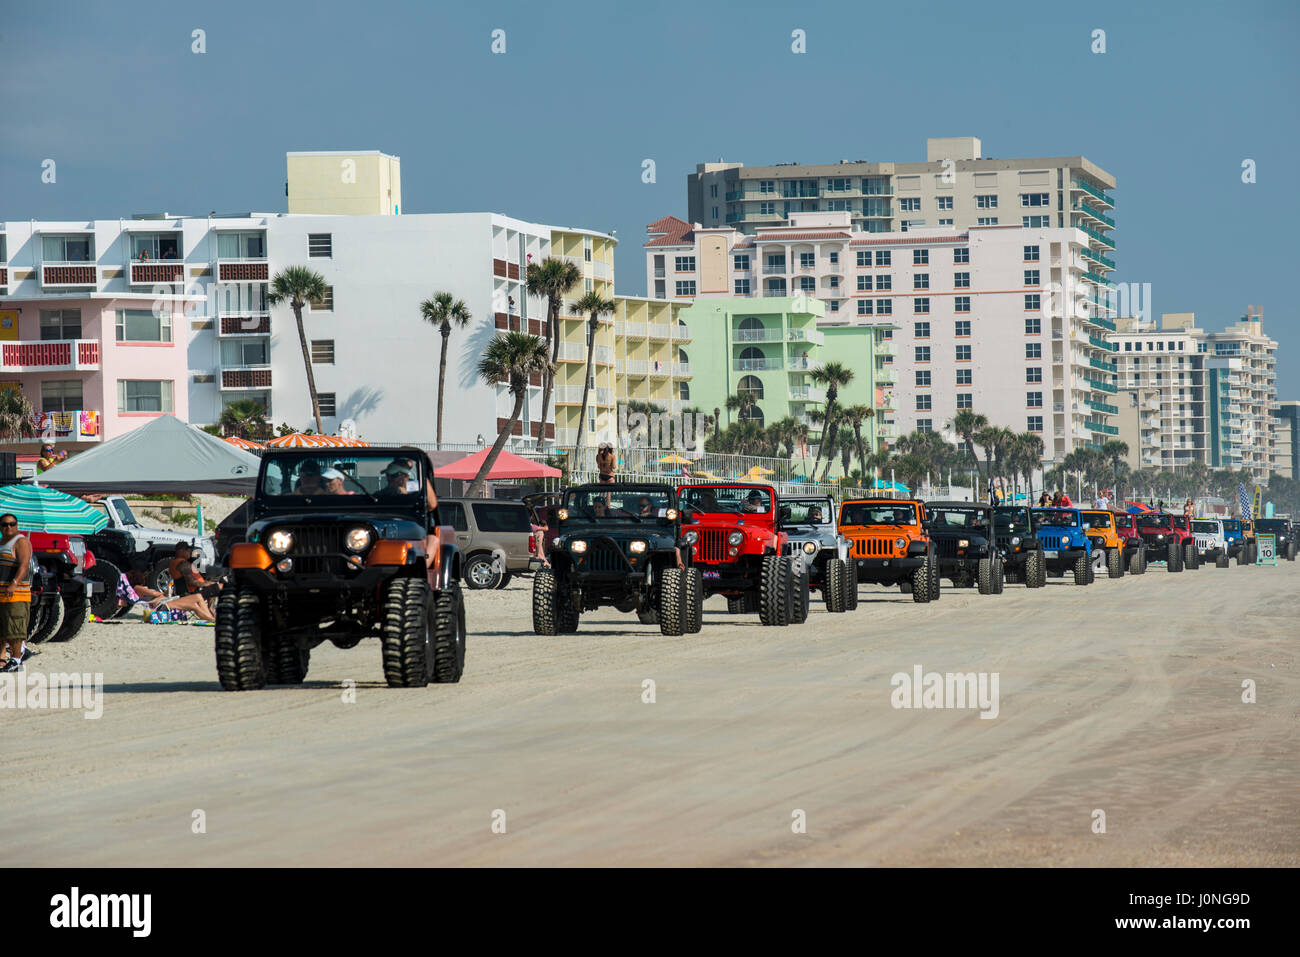 Jeep week at Daytona Beach thousands of jeeps on the beach and on the